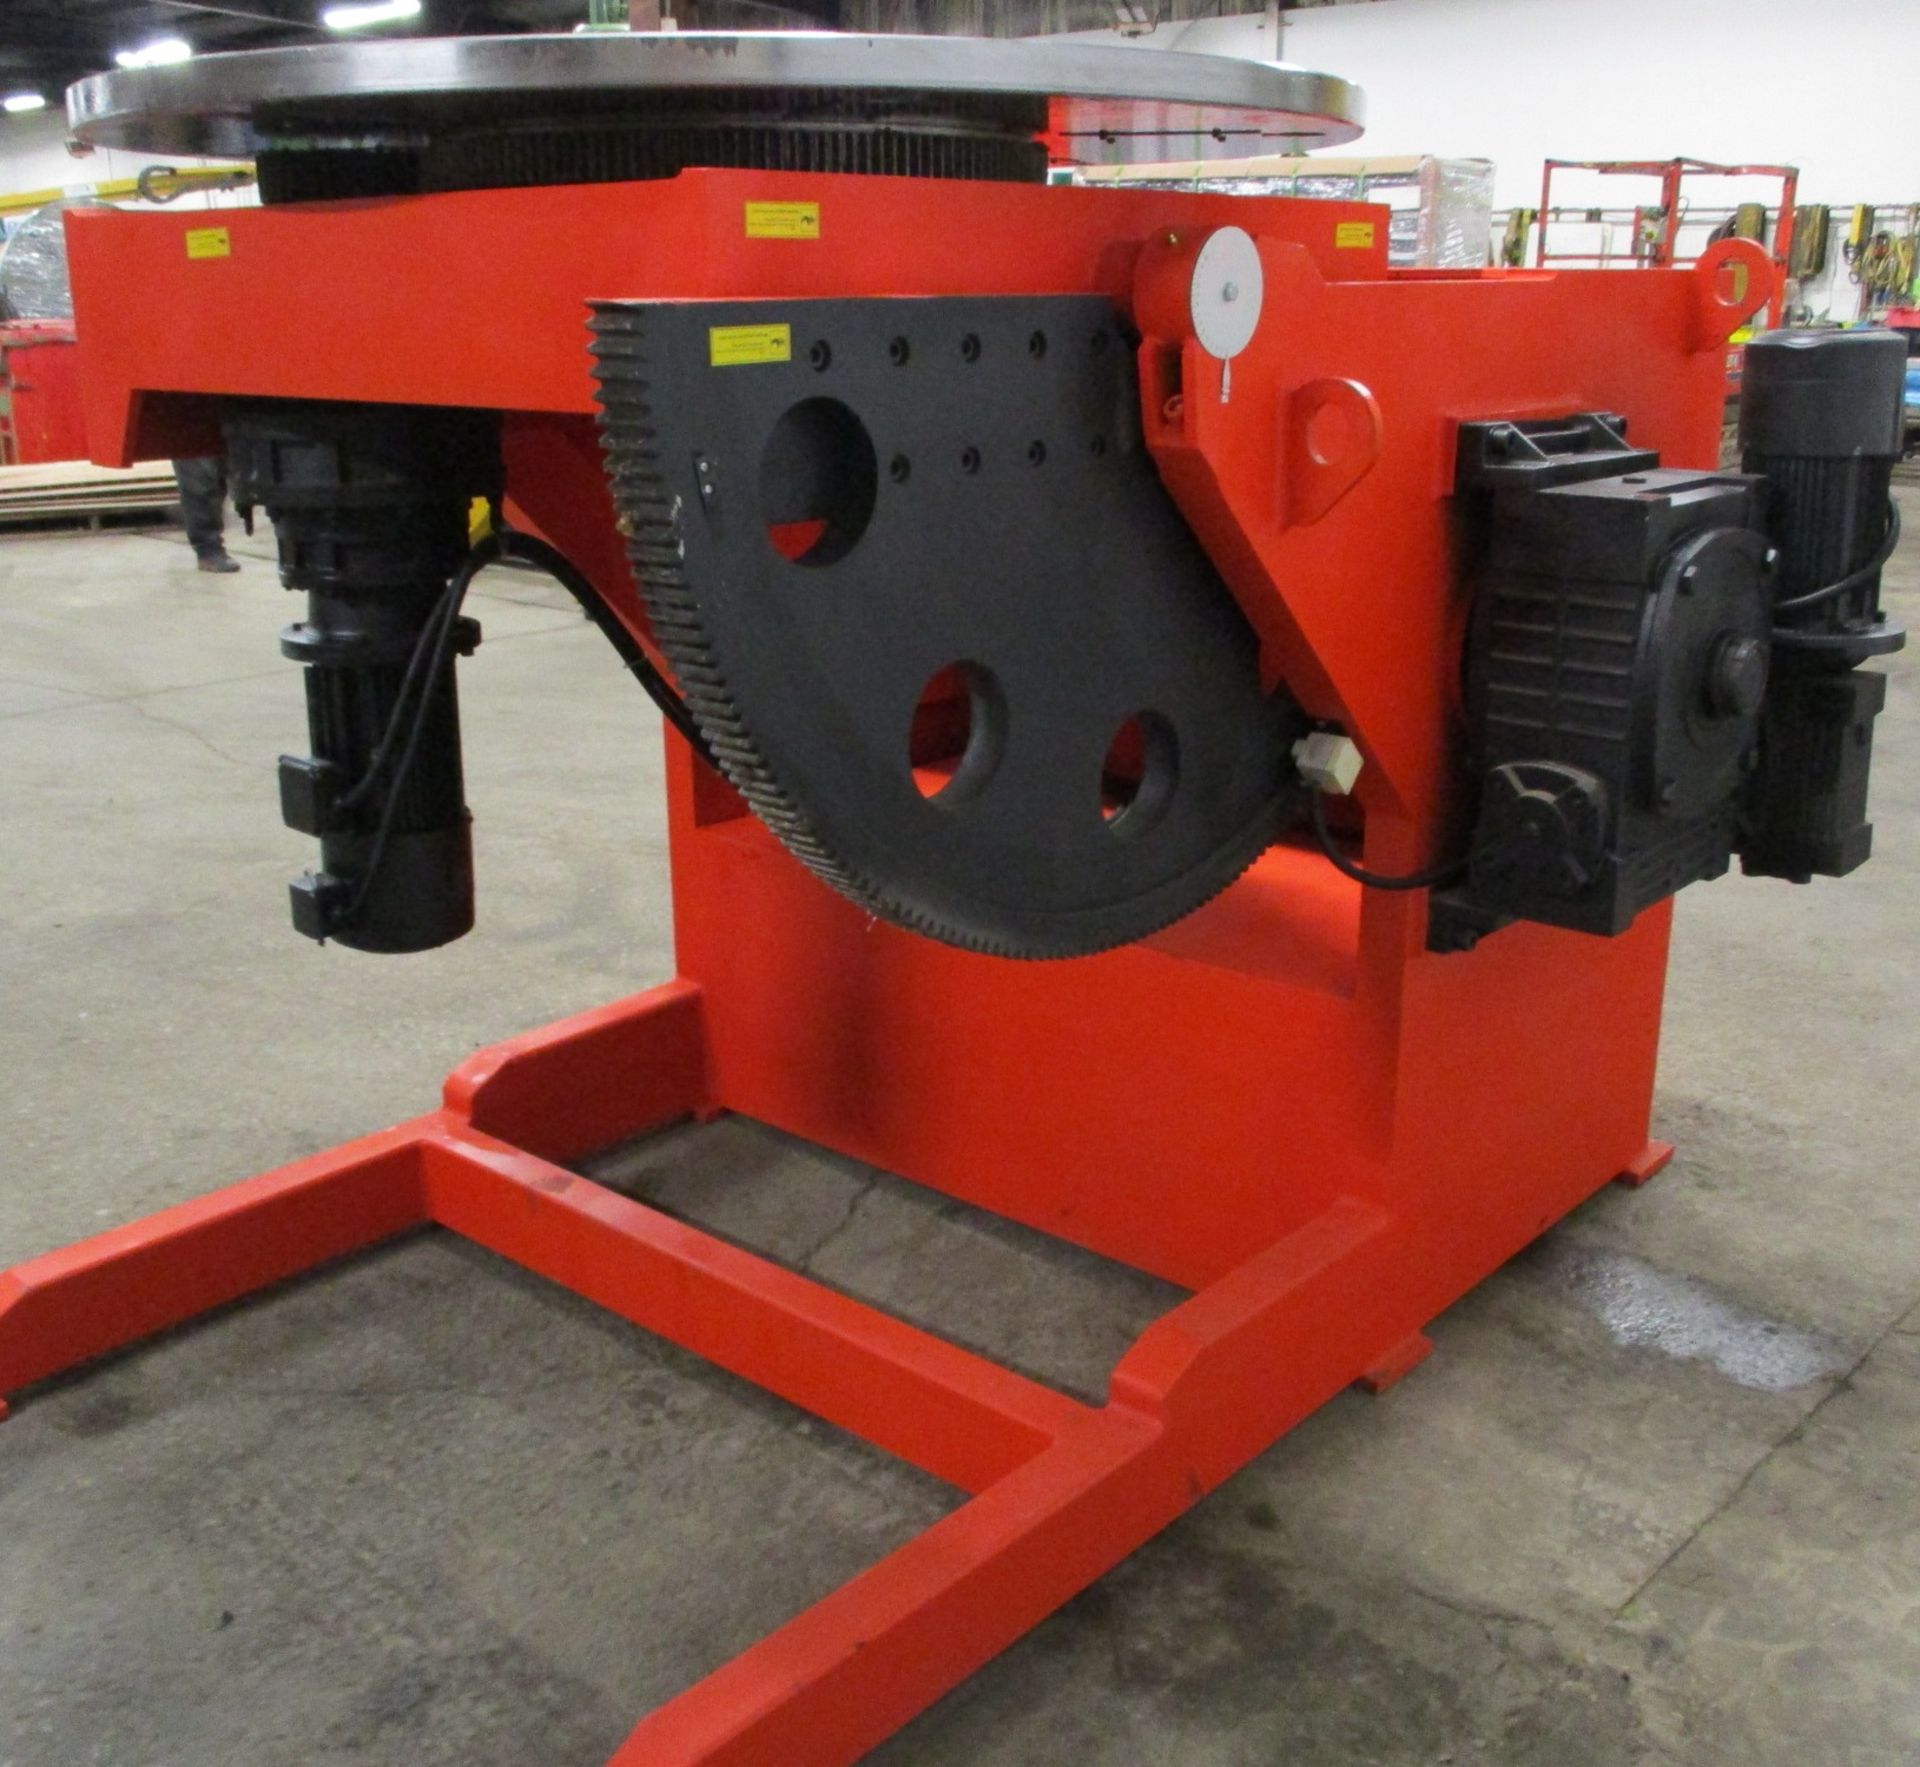 MINT VD-15000 WELDING POSITIONER 15000lbs capacity , tilt and rotate with variable speed drive and